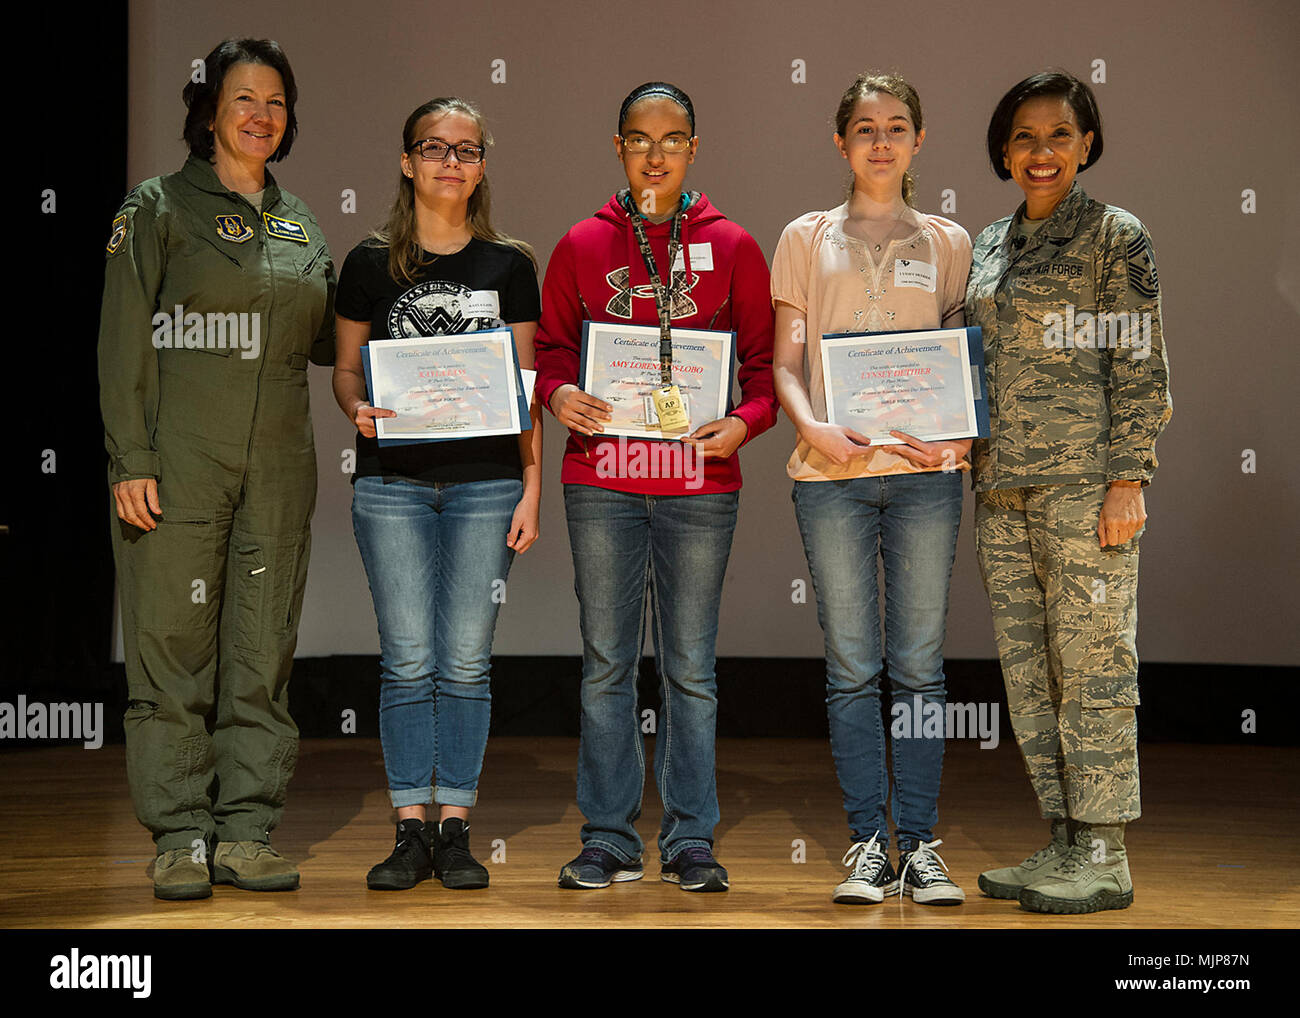 315th Airlift Wing Vice Commander, Col. Jeanine McAnaney (left) and Air Force Reserve Command Chief Ericka Kelly (right) stand with the winners of the Joint Base Charleston Women in Aviation Scholarship Essay contest (from right)  Lynsey Dethier, 1st place, Amy Lorentzos-Lobo, 2nd place, and Kayla Lass, 3rd place, at the JBC WIA Career Day here, March 20. Armed Forces and civilians displaying courage bravery dedication commitment and sacrifice Stock Photo